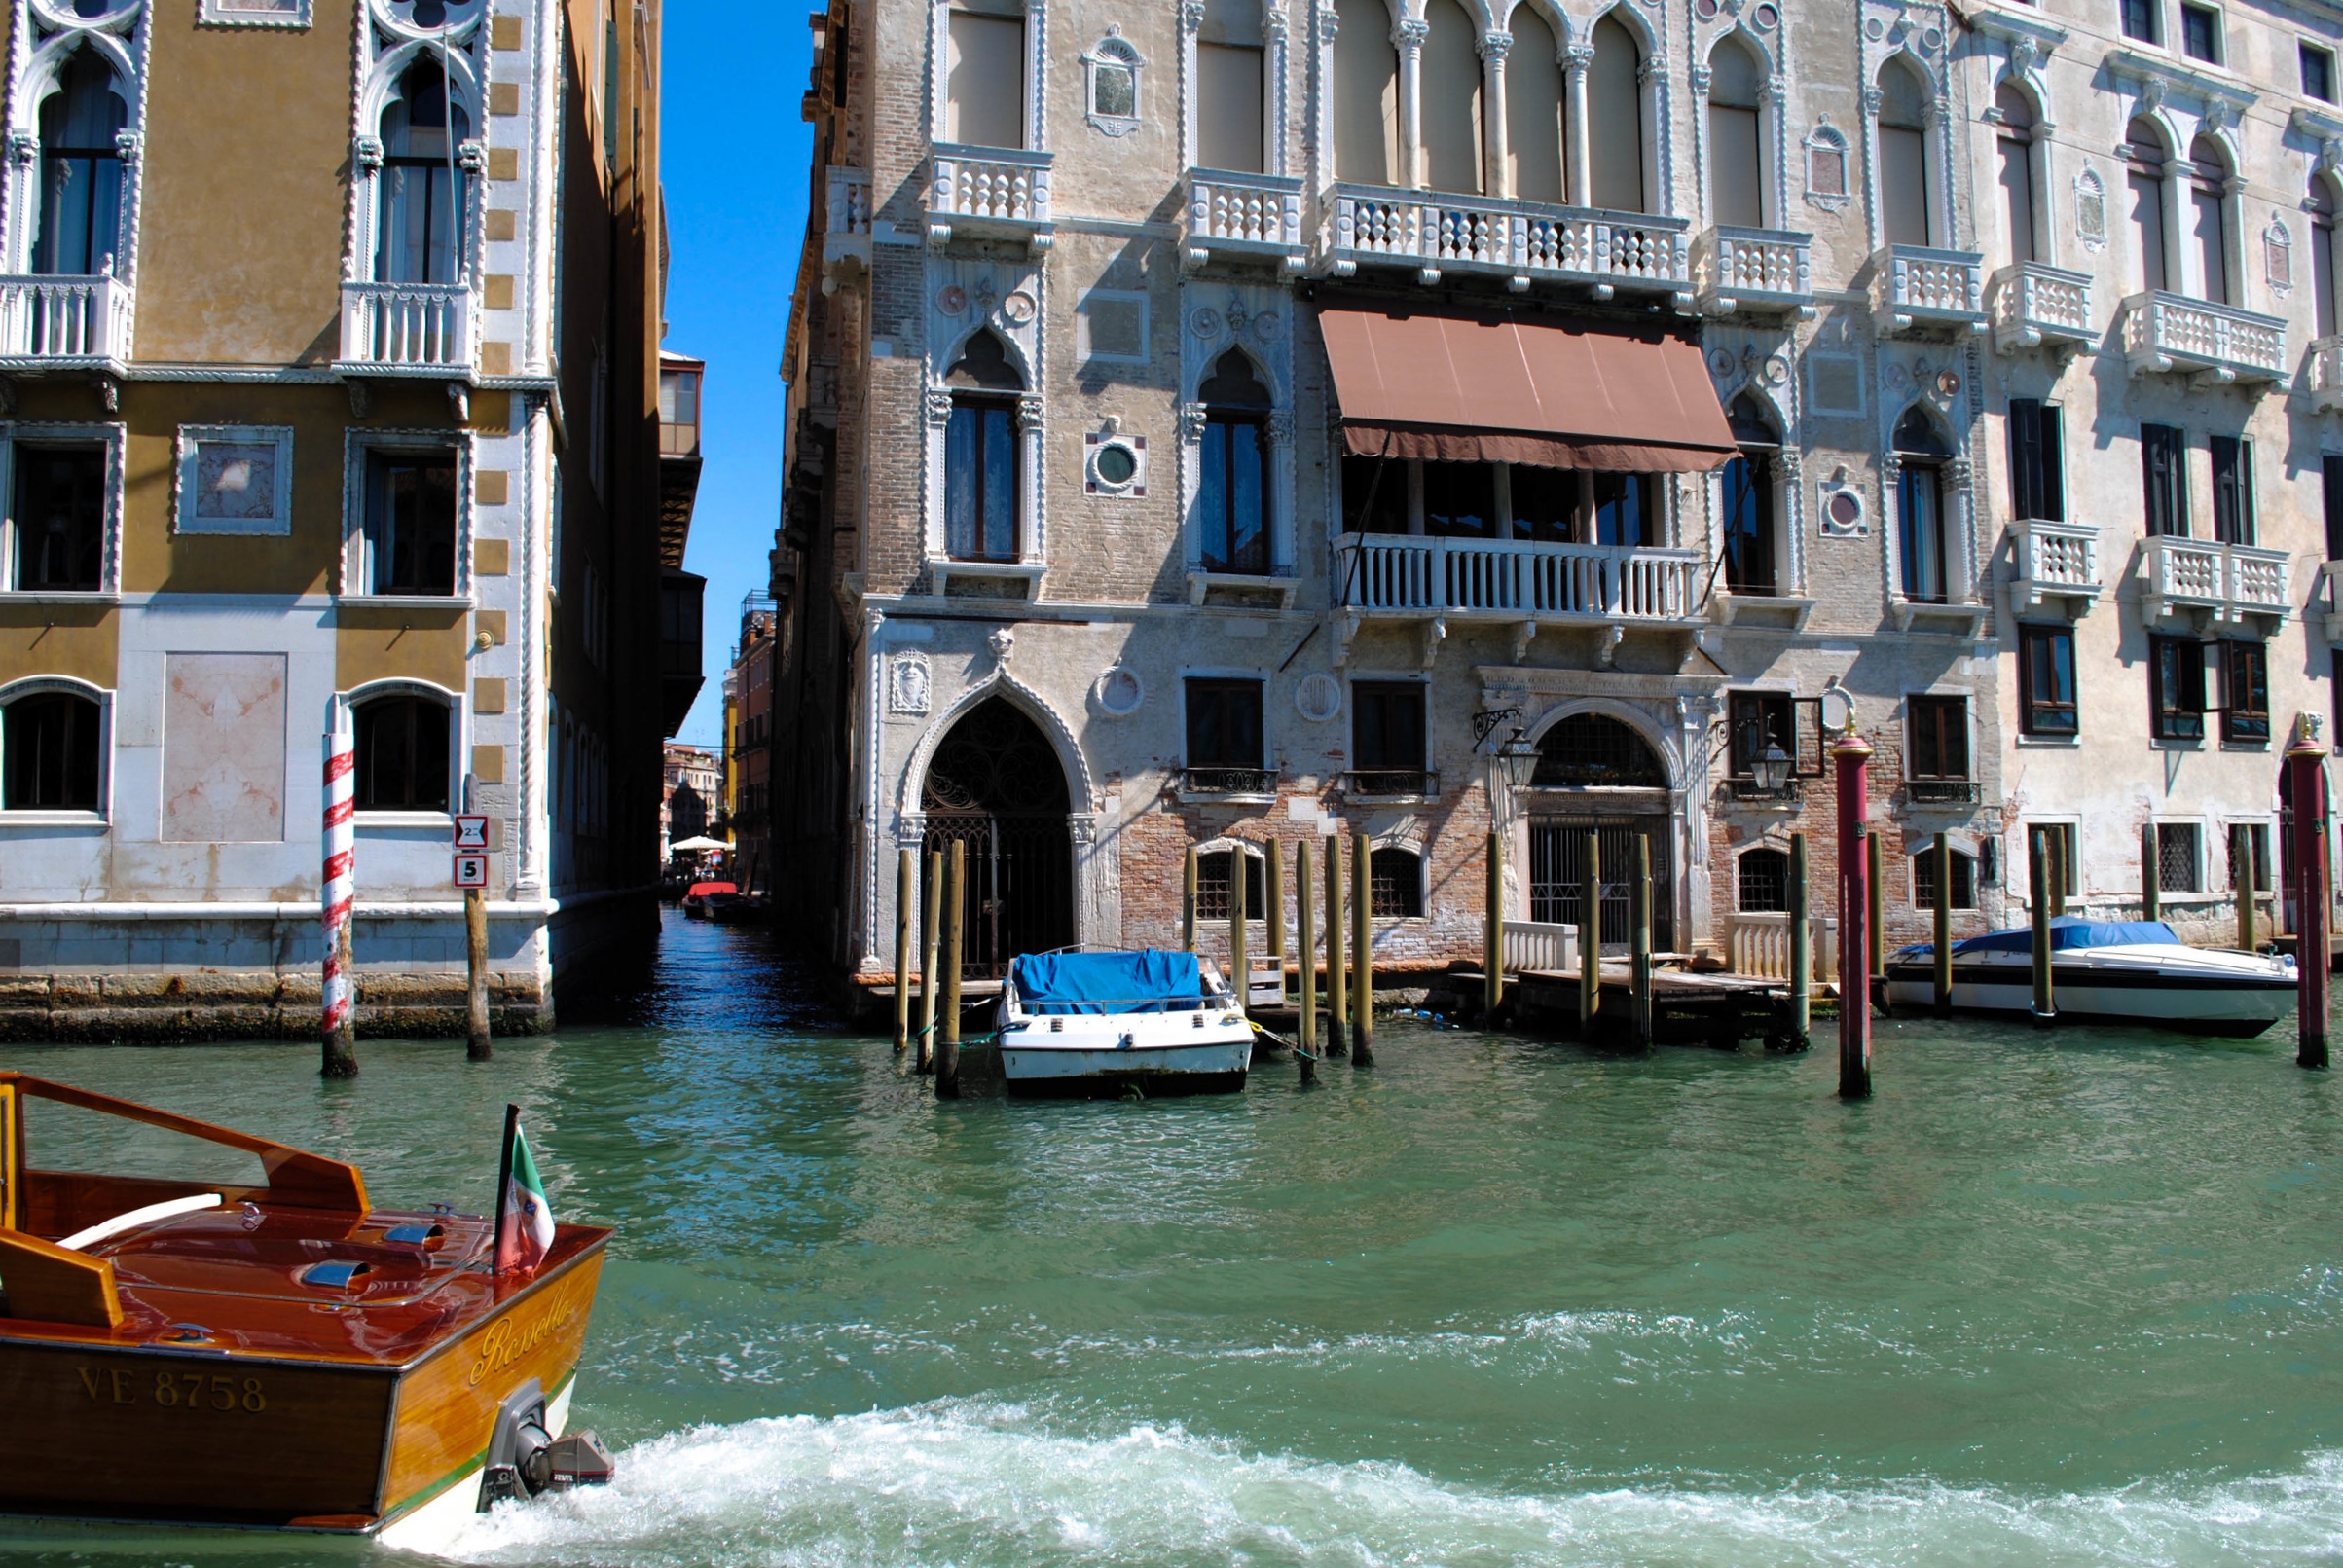 Along the Grand Canal in Venice, Italy